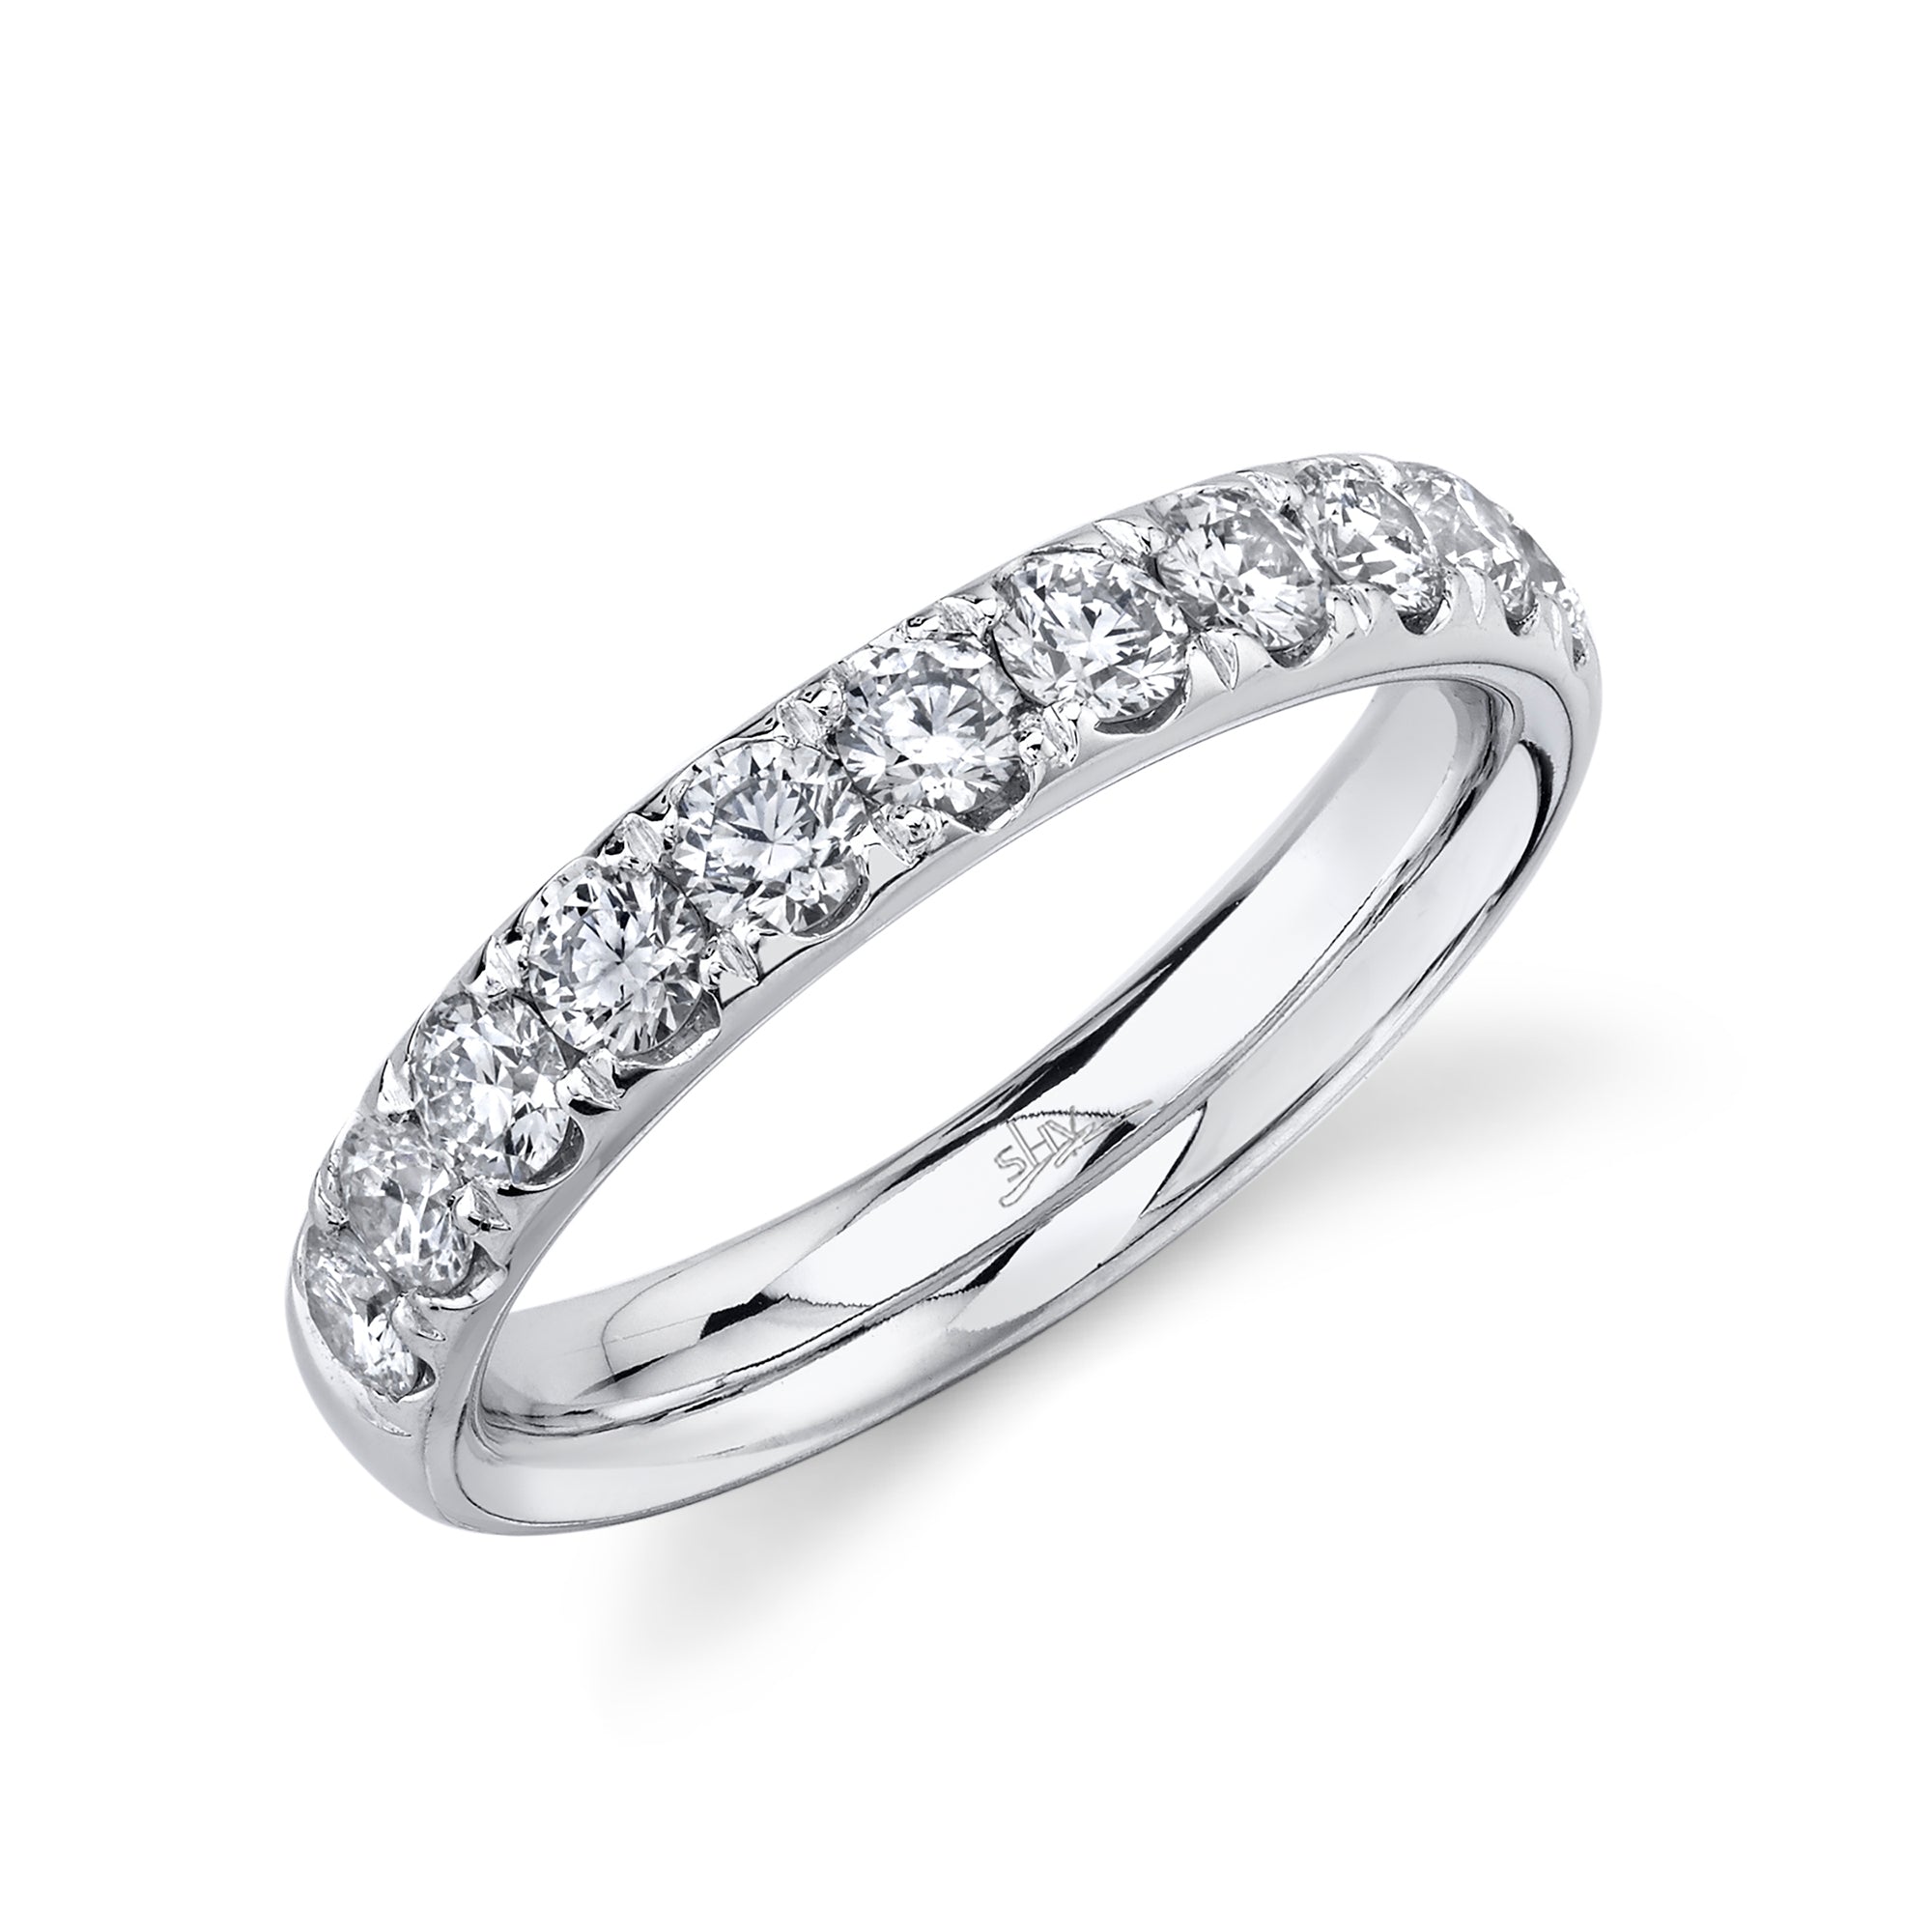 14 kt white gold classic wedding bands - sc22005396